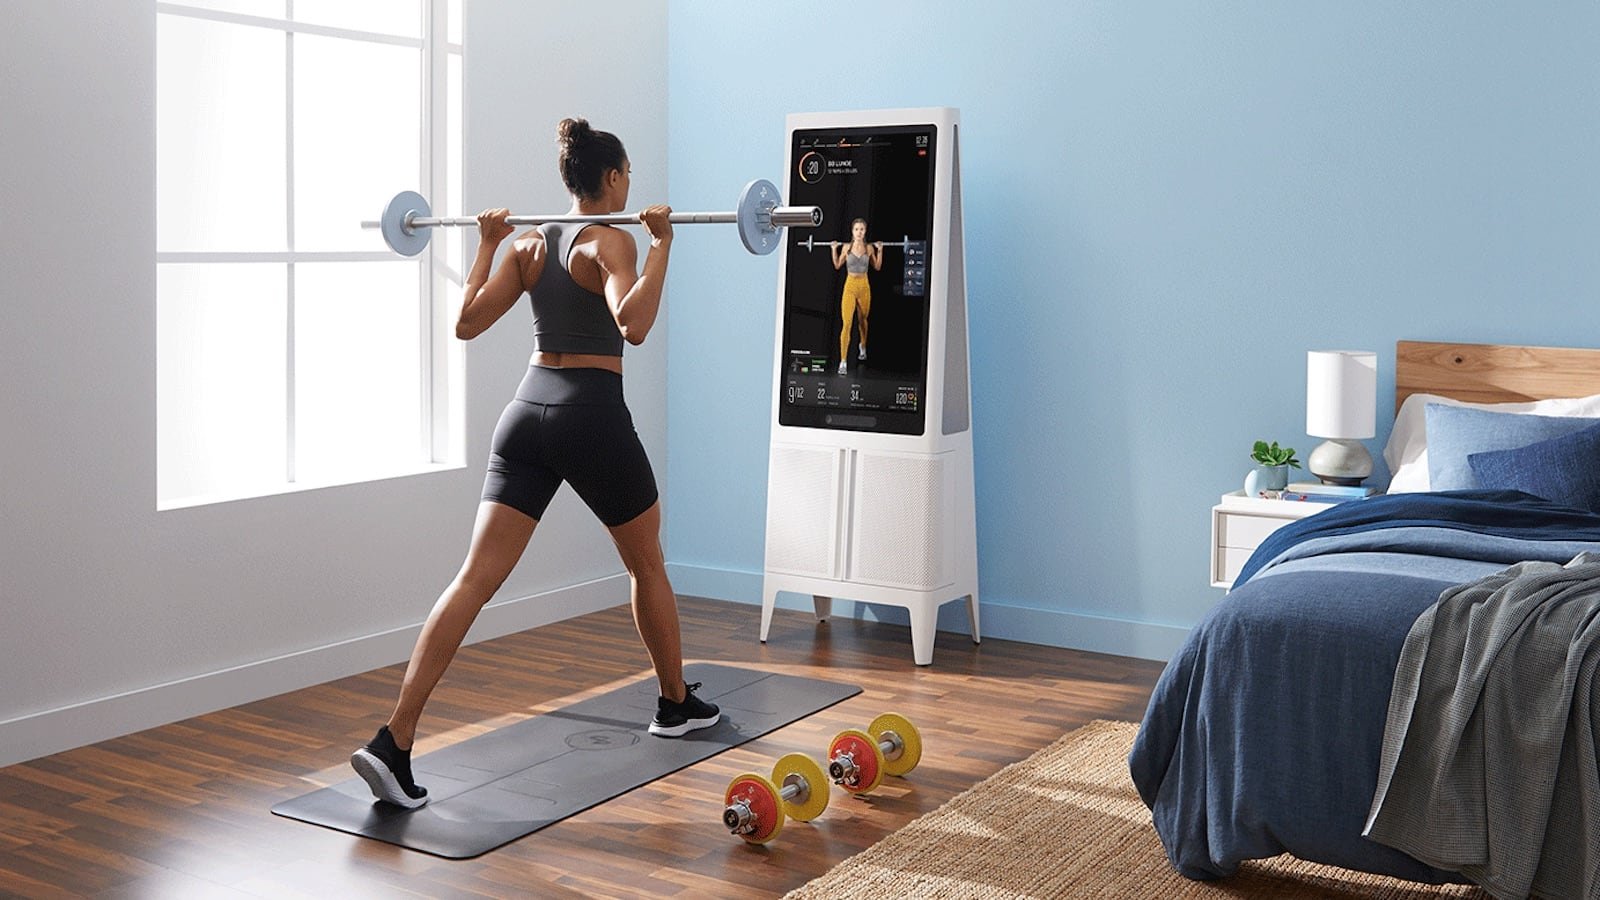 Tempo Studio AI Home Gym comes with all the equipment you need